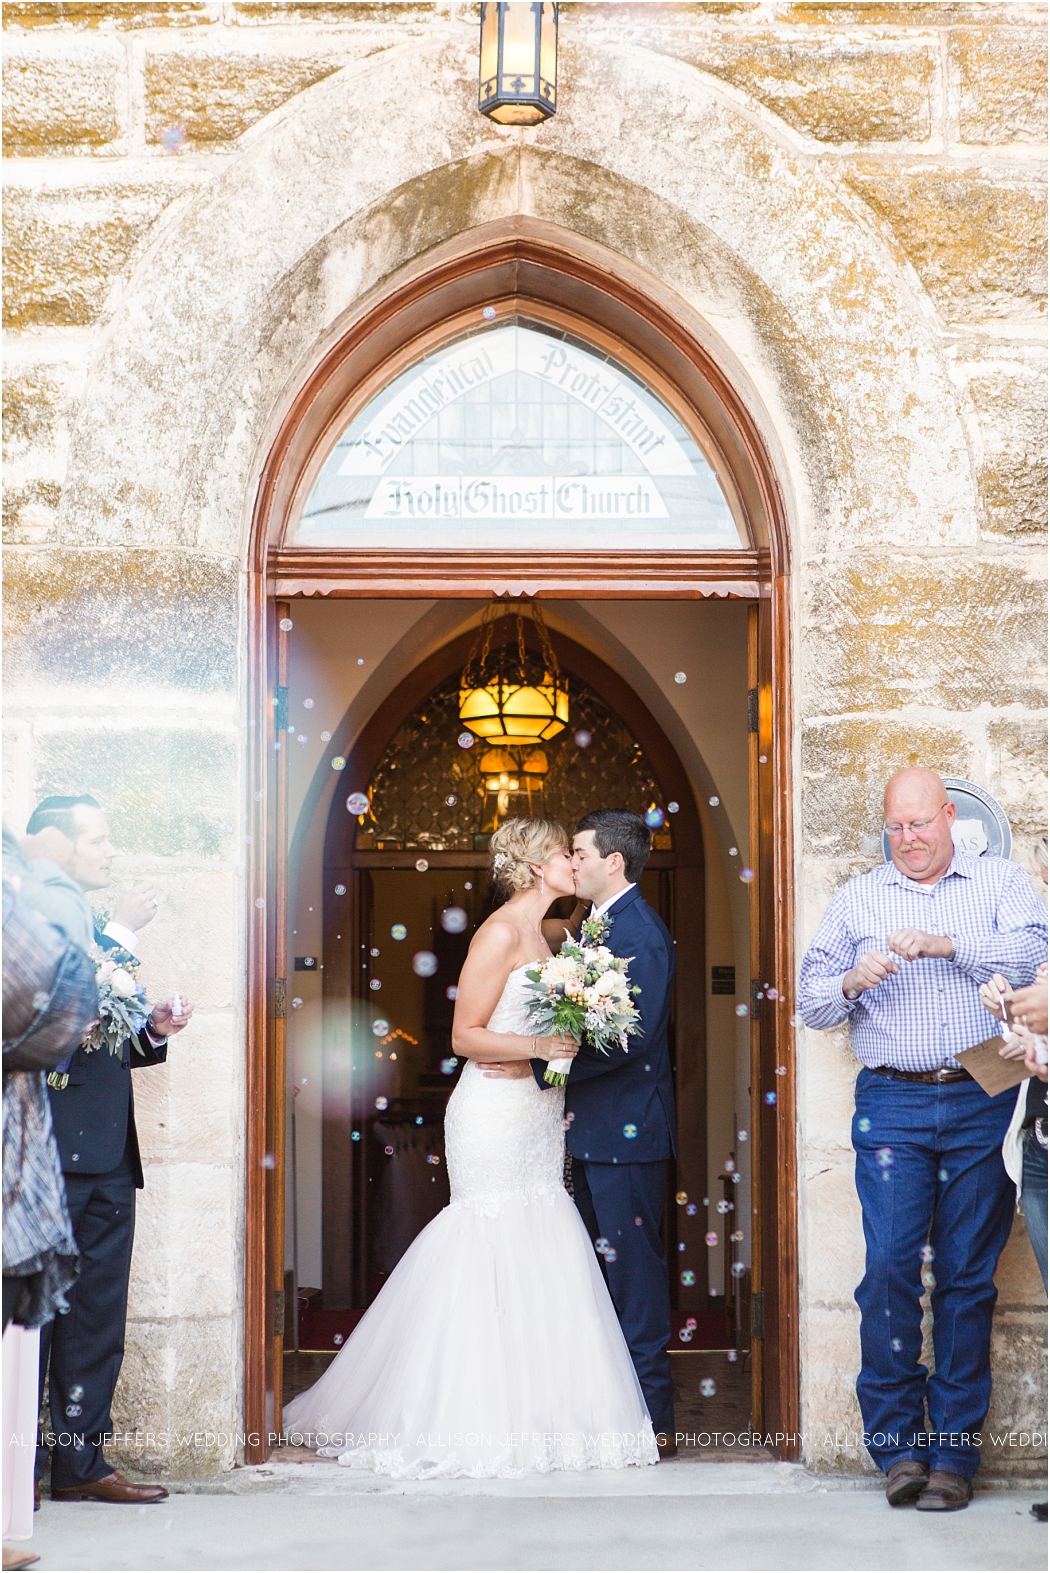 pastel-wedding-at-holy-ghost-lutheran-church-in-fredericksburg-texas-fredericksburg-wedding-photographer_0095